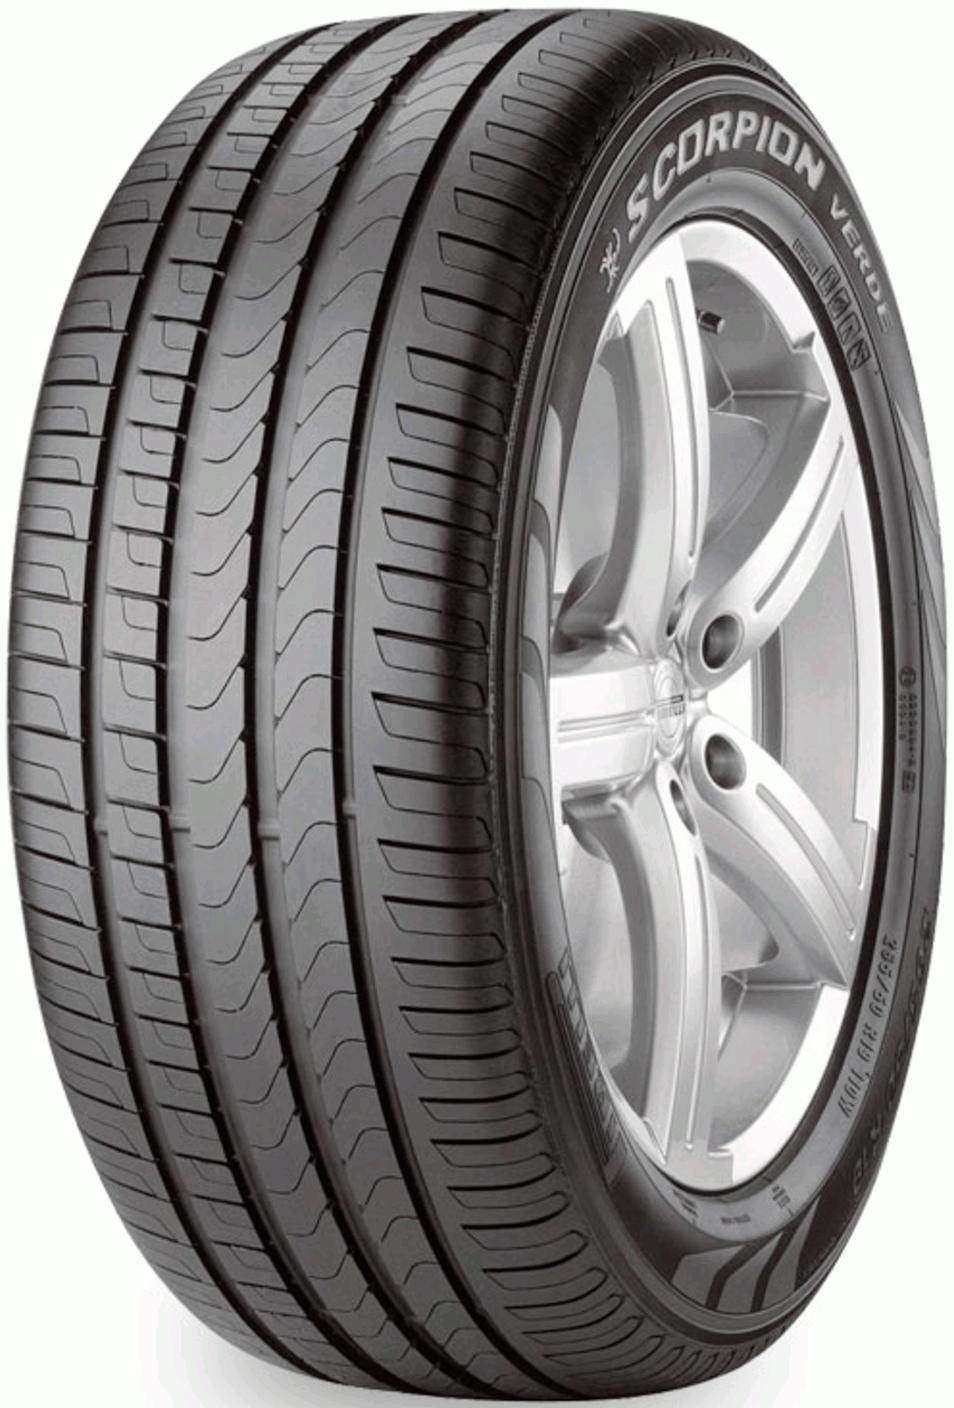 pirelli-scorpion-verde-tire-reviews-and-tests